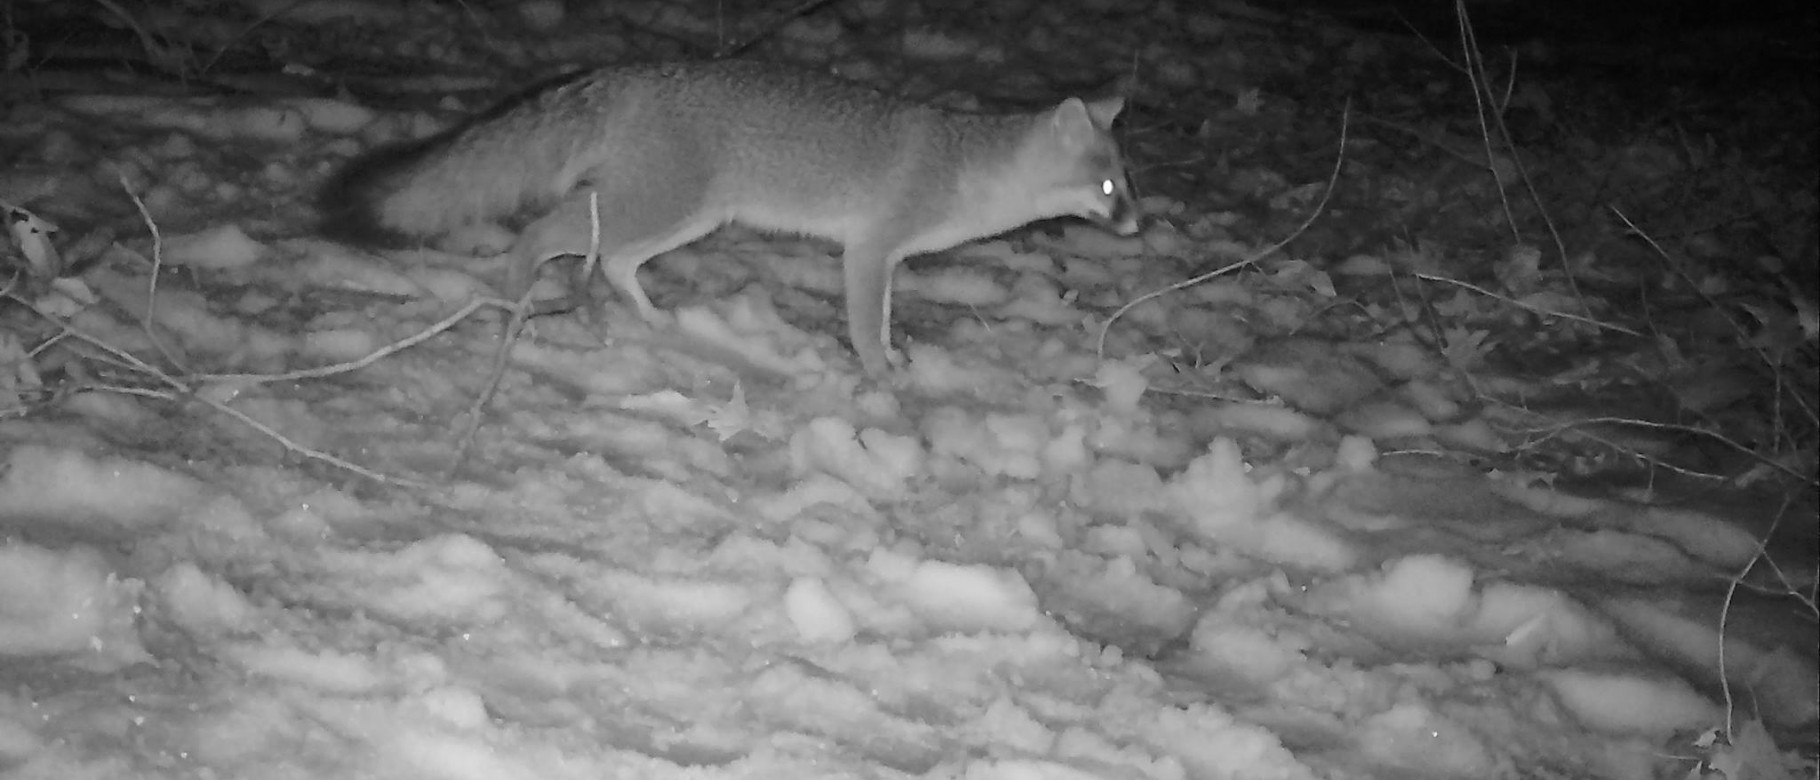 A gray fox is captured on camera as part Noah Perlut's GapTracks project.